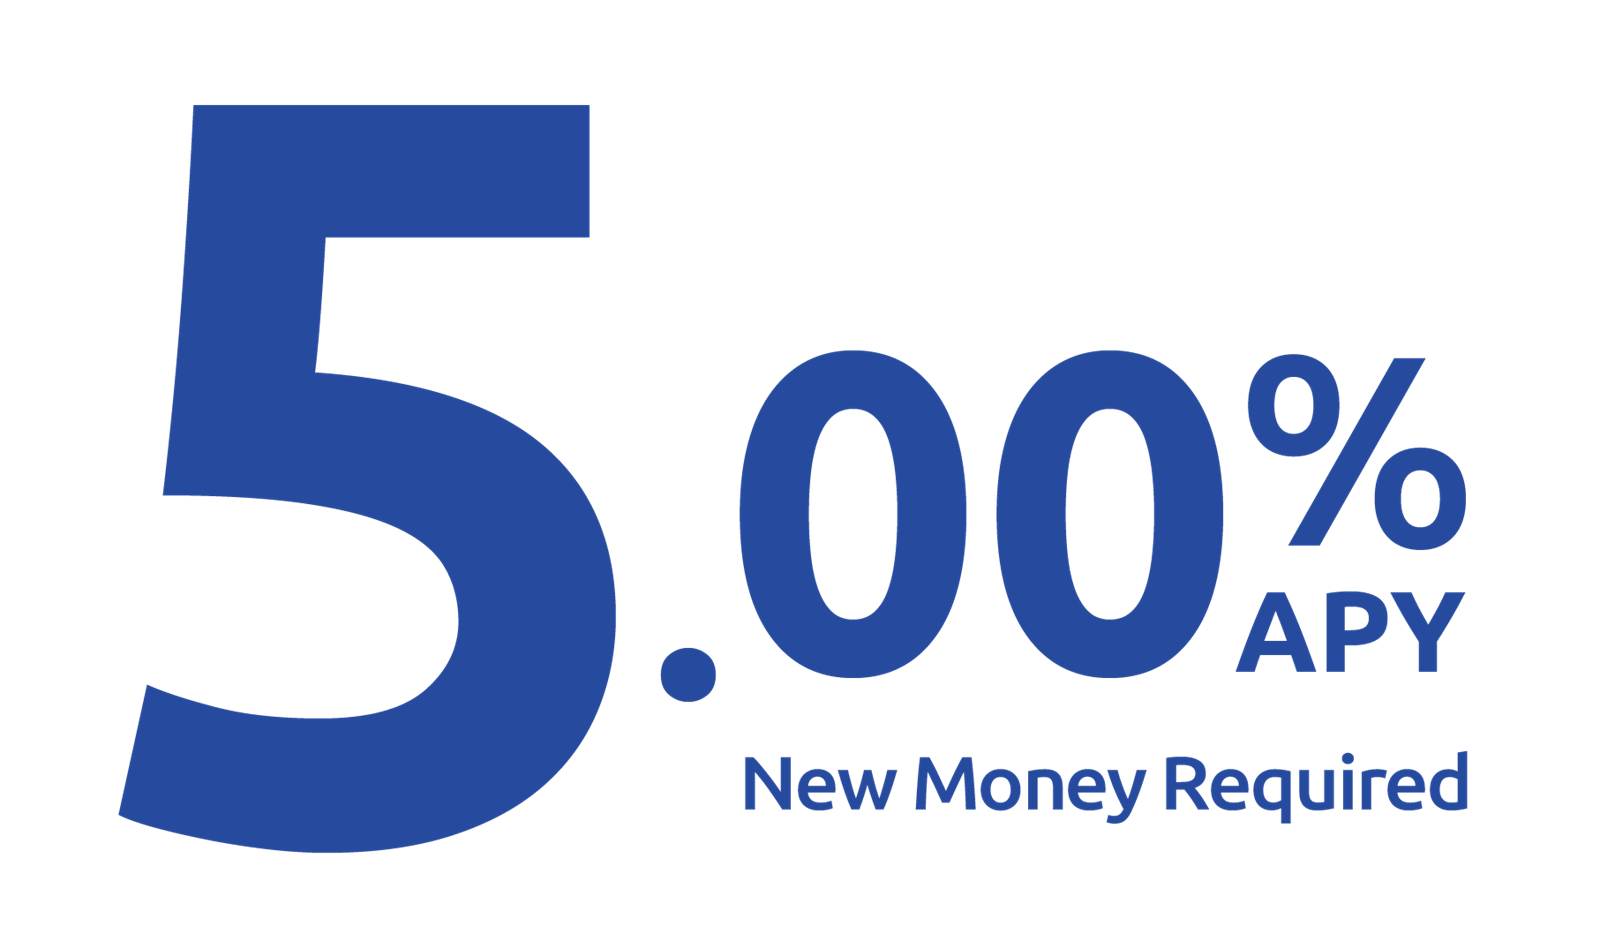 5.00% APY - New Money Required